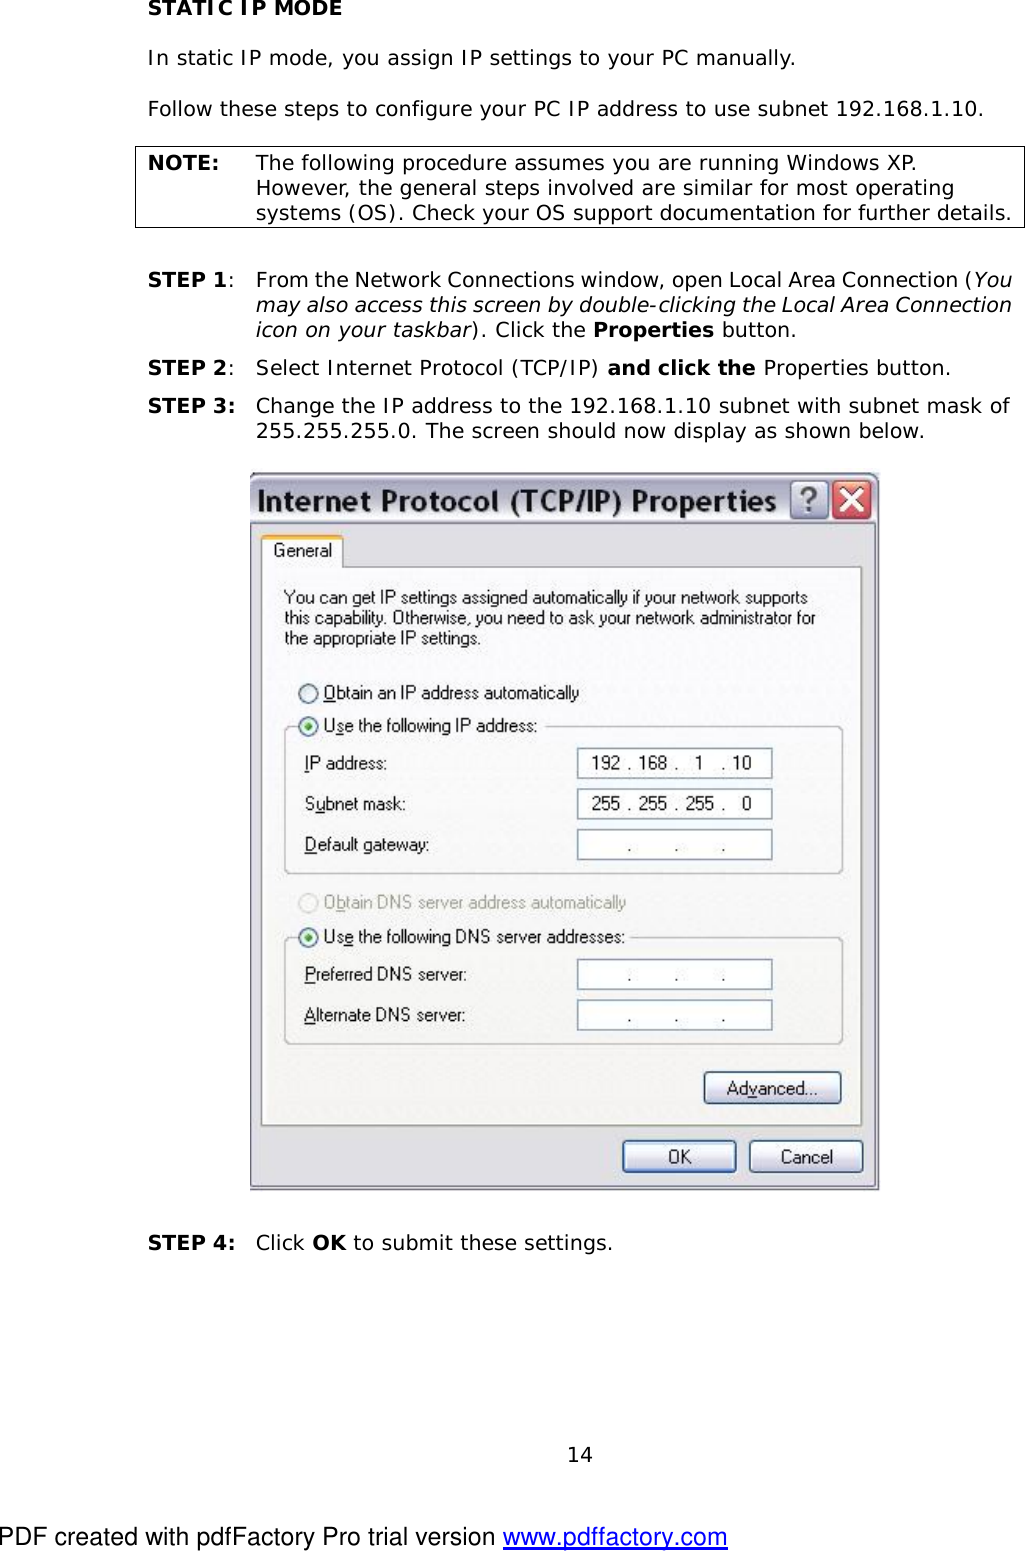  14 STATIC IP MODE  In static IP mode, you assign IP settings to your PC manually.  Follow these steps to configure your PC IP address to use subnet 192.168.1.10.  NOTE:  The following procedure assumes you are running Windows XP.  However, the general steps involved are similar for most operating systems (OS). Check your OS support documentation for further details.  STEP 1: From the Network Connections window, open Local Area Connection (You may also access this screen by double-clicking the Local Area Connection icon on your taskbar). Click the Properties button. STEP 2: Select Internet Protocol (TCP/IP) and click the Properties button. STEP 3: Change the IP address to the 192.168.1.10 subnet with subnet mask of 255.255.255.0. The screen should now display as shown below.      STEP 4:  Click OK to submit these settings.  PDF created with pdfFactory Pro trial version www.pdffactory.com